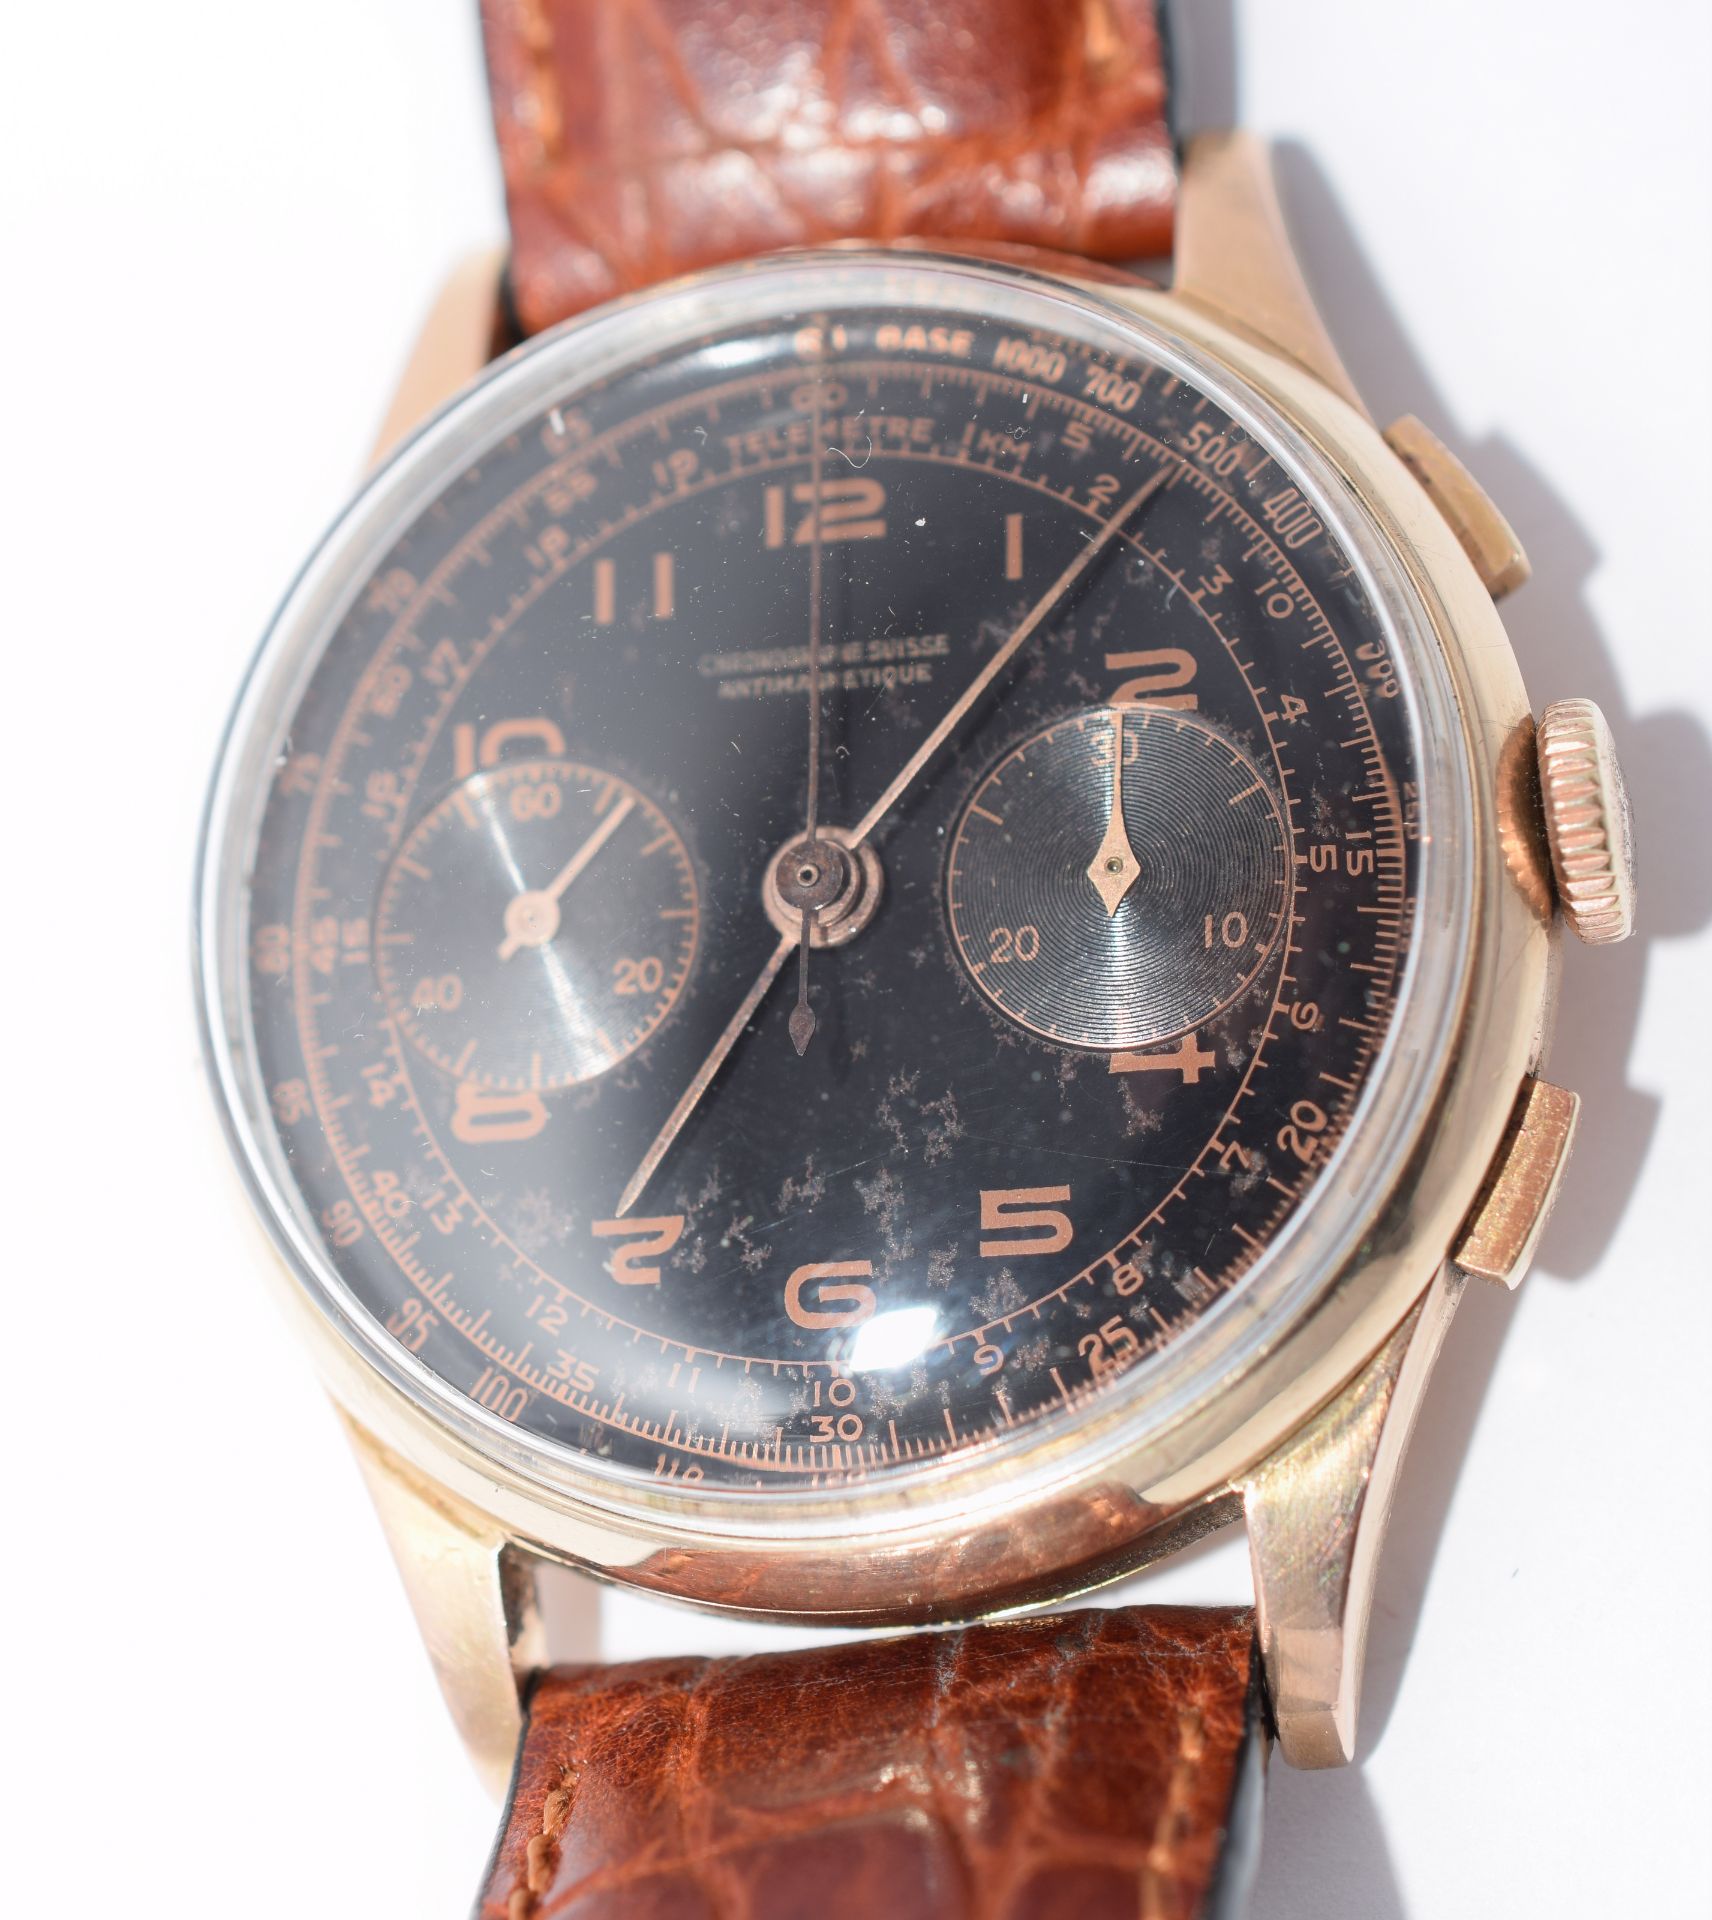 Chronographe Suisse 18ct Gold Vintage Chronograph With Black Dial - Image 3 of 11